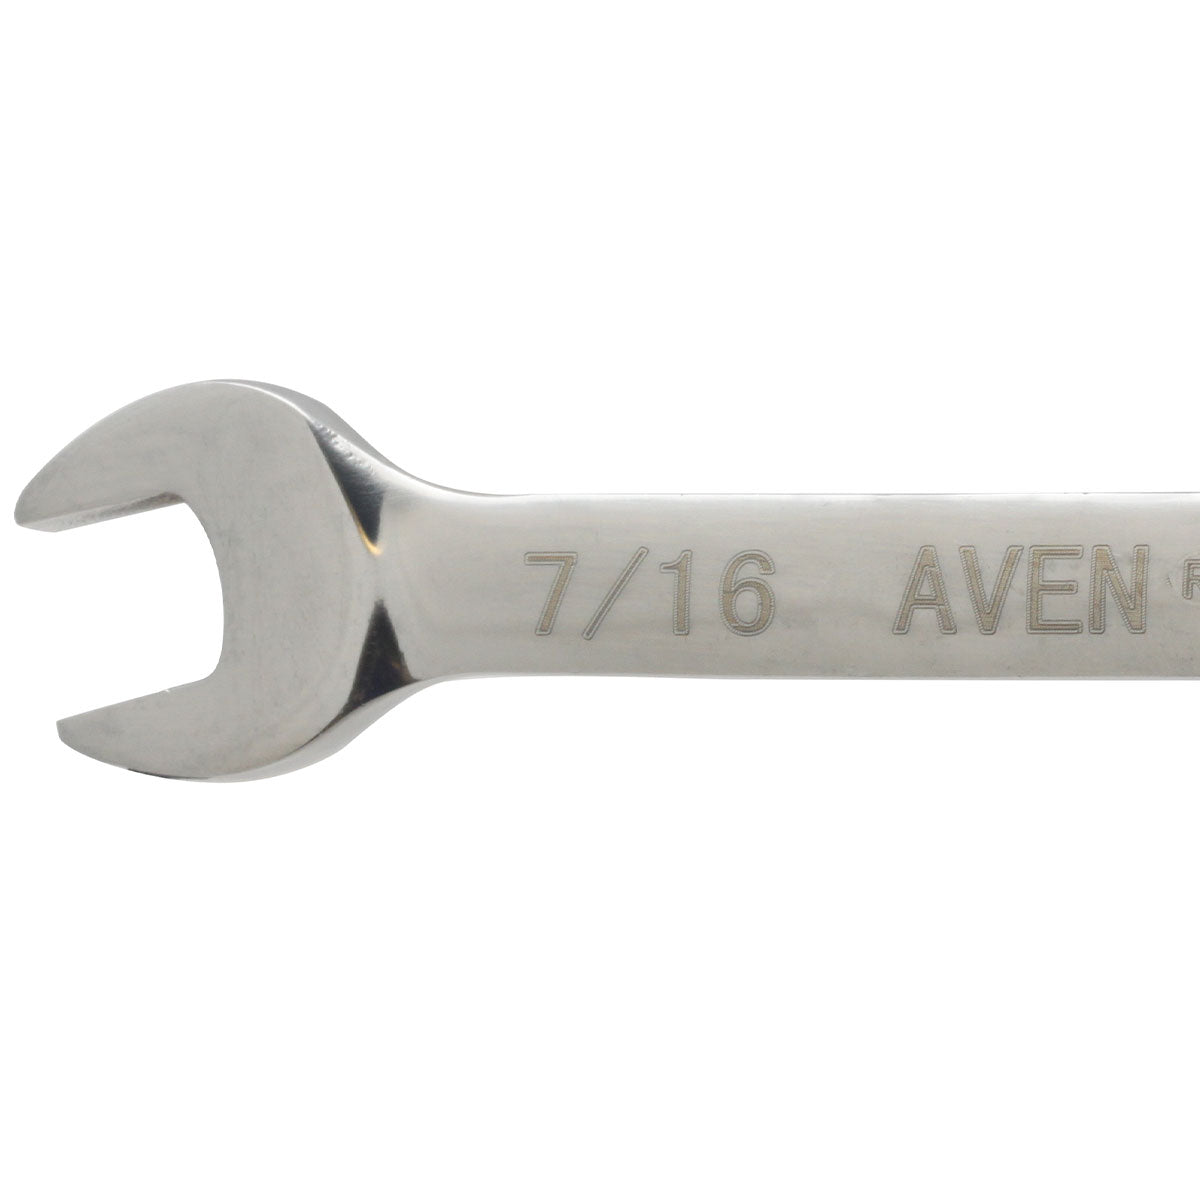 Combination Wrench Stainless Steel 7/16